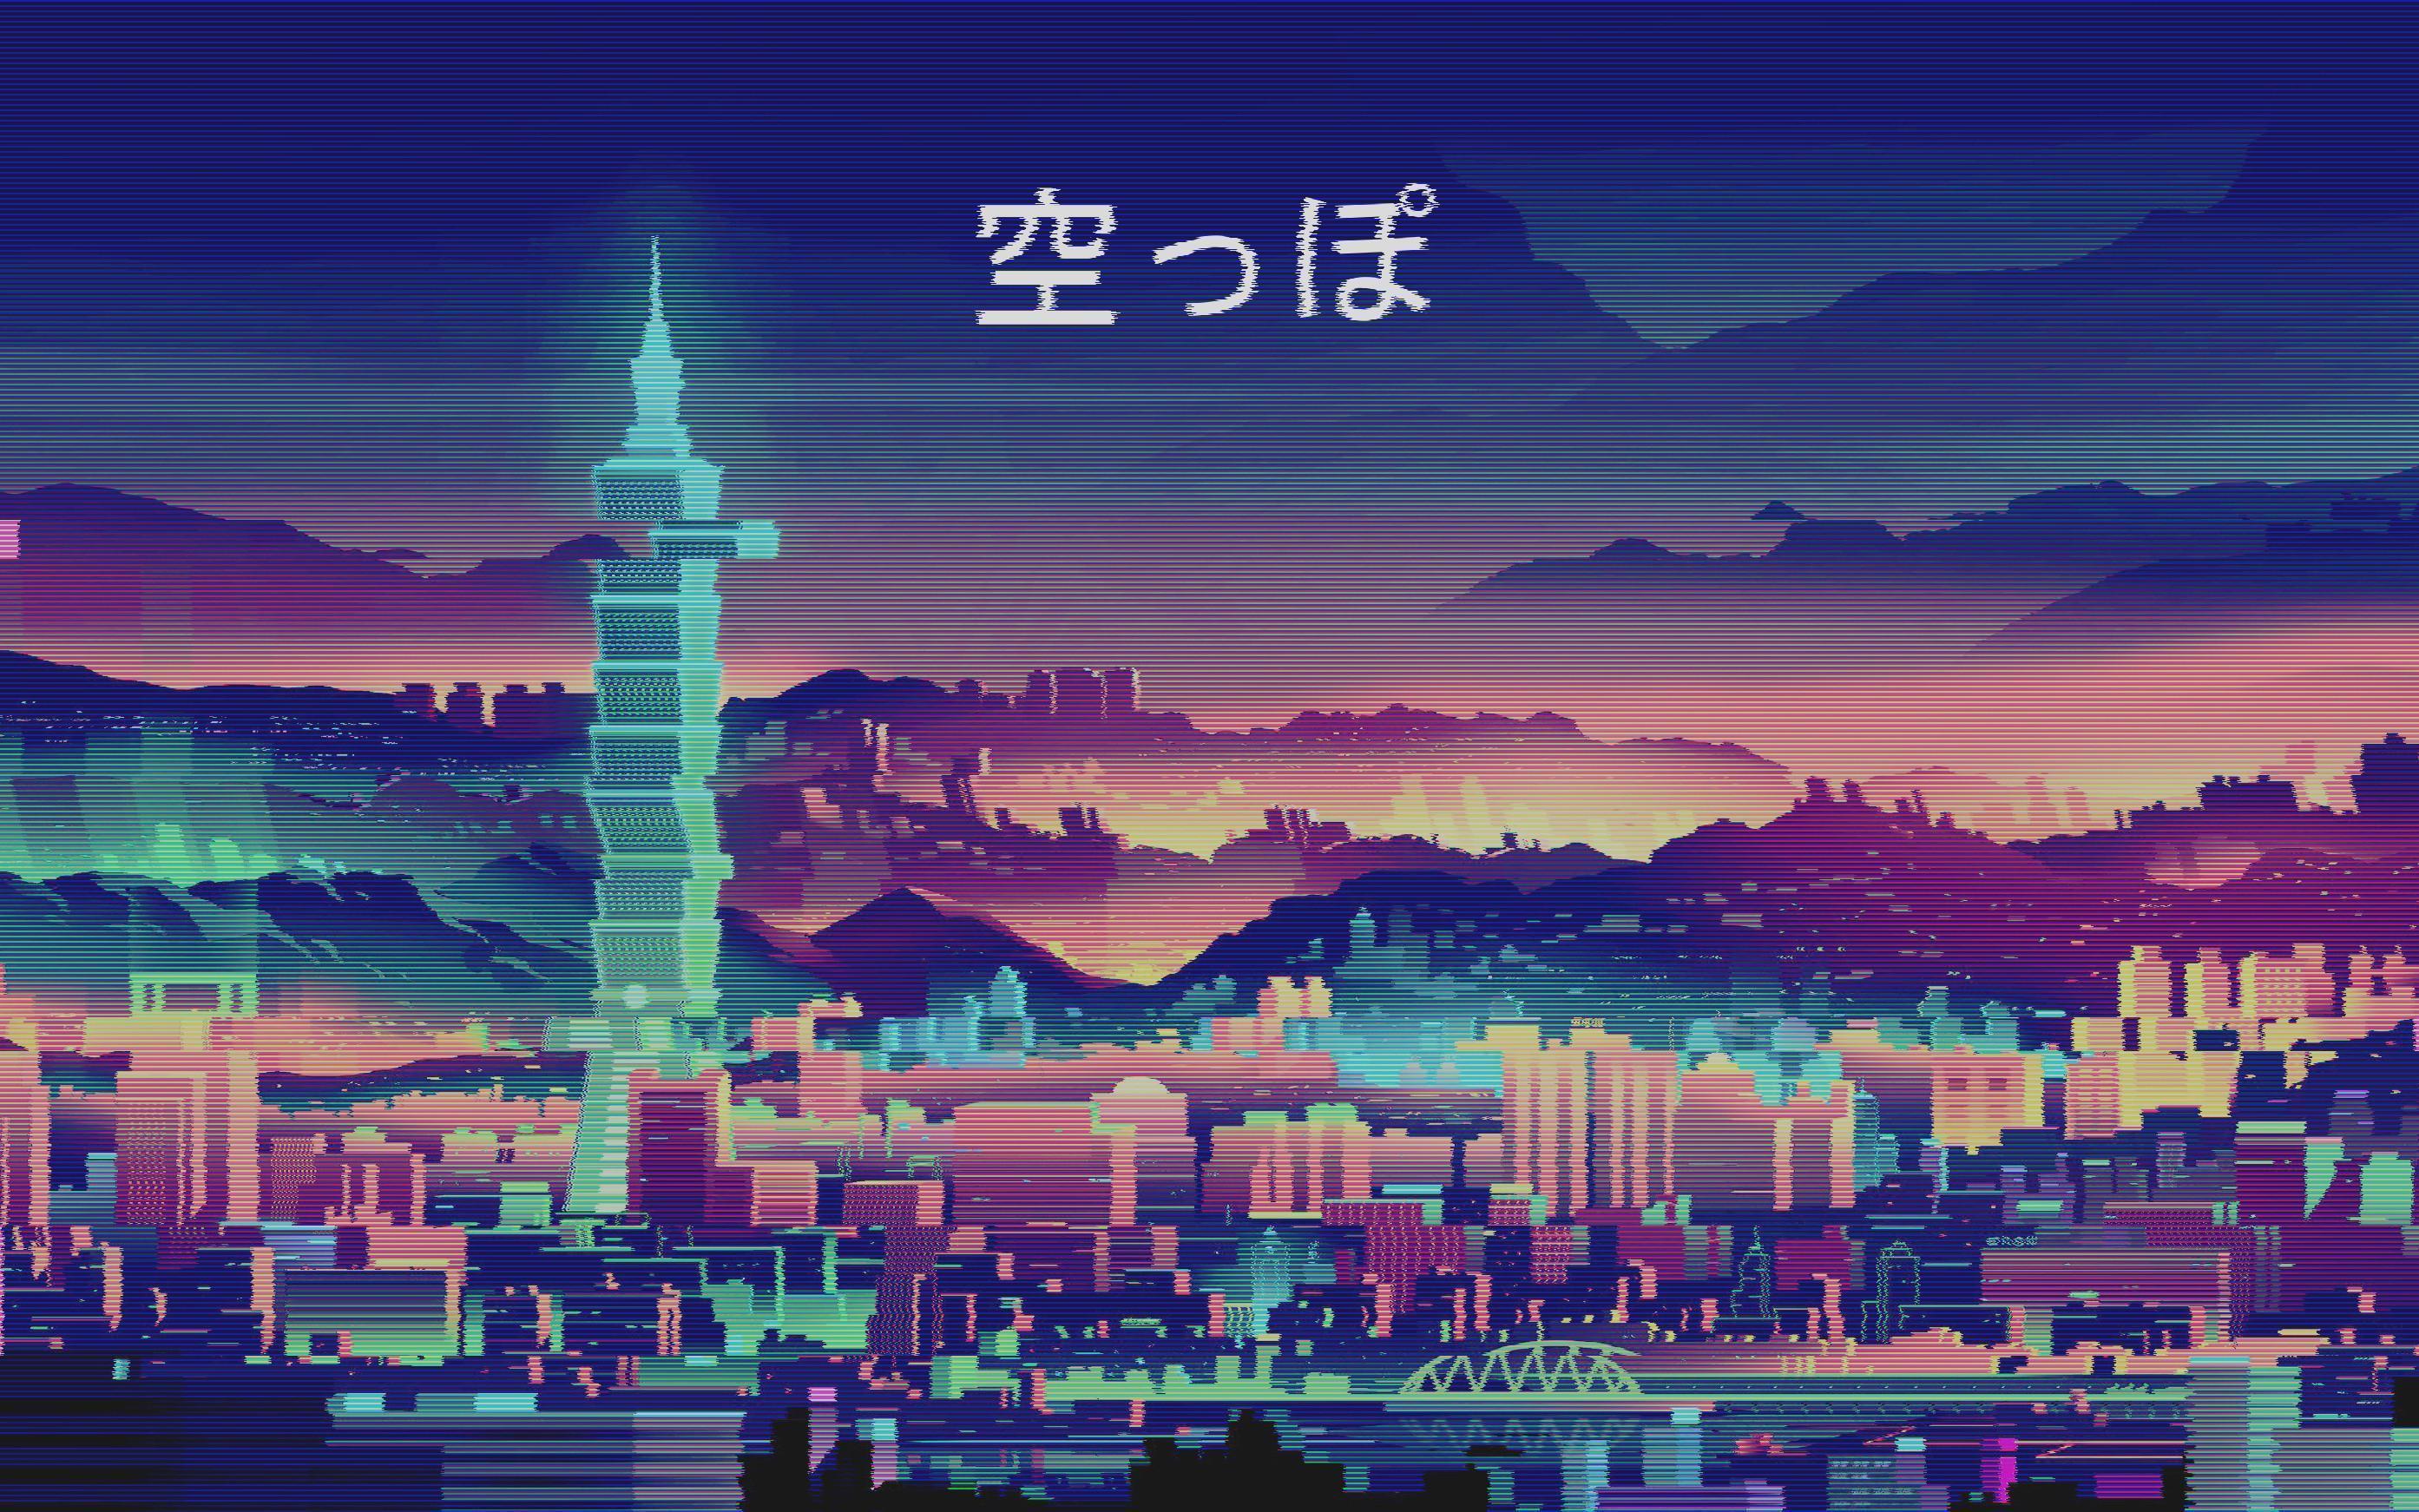 Download Neon Cute Retro Anime Aesthetic Collage Wallpaper | Wallpapers.com